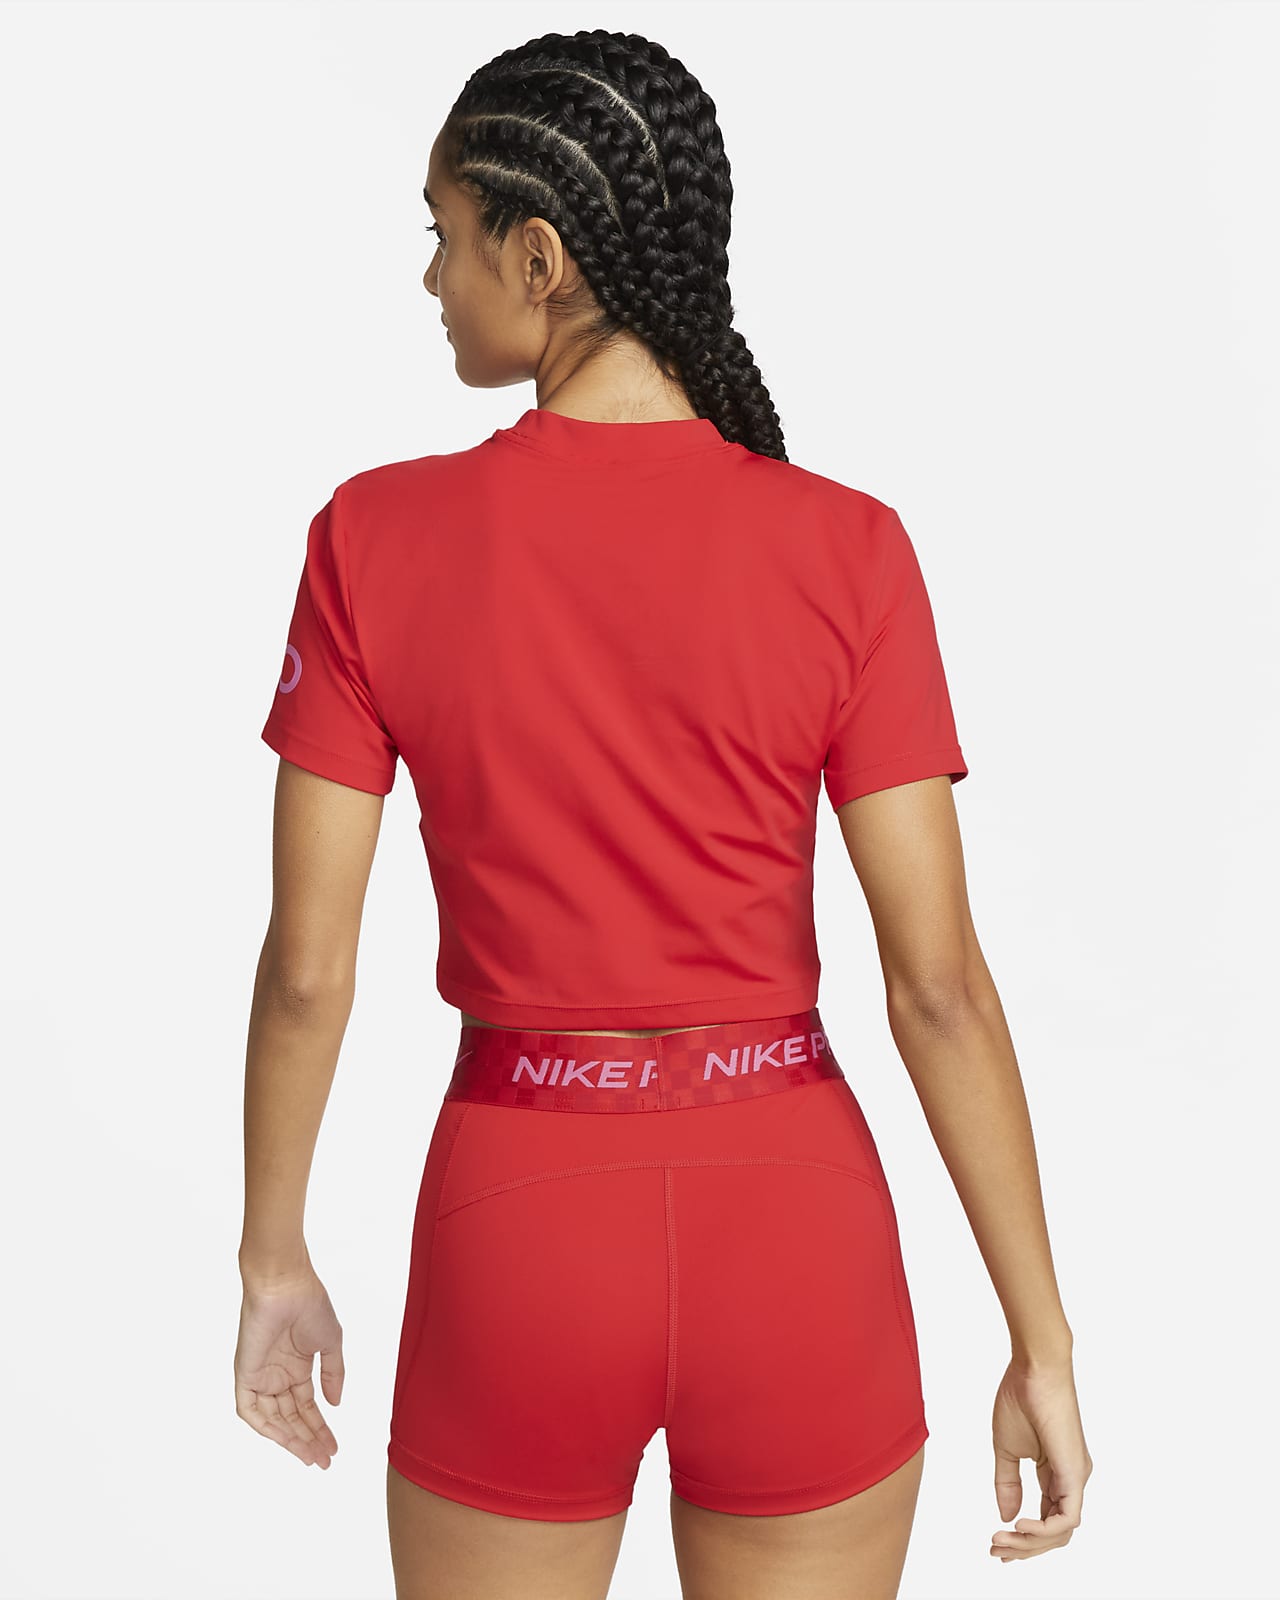 Nike Pro Dri-FIT Women's Short-Sleeve Cropped Graphic Training Top.